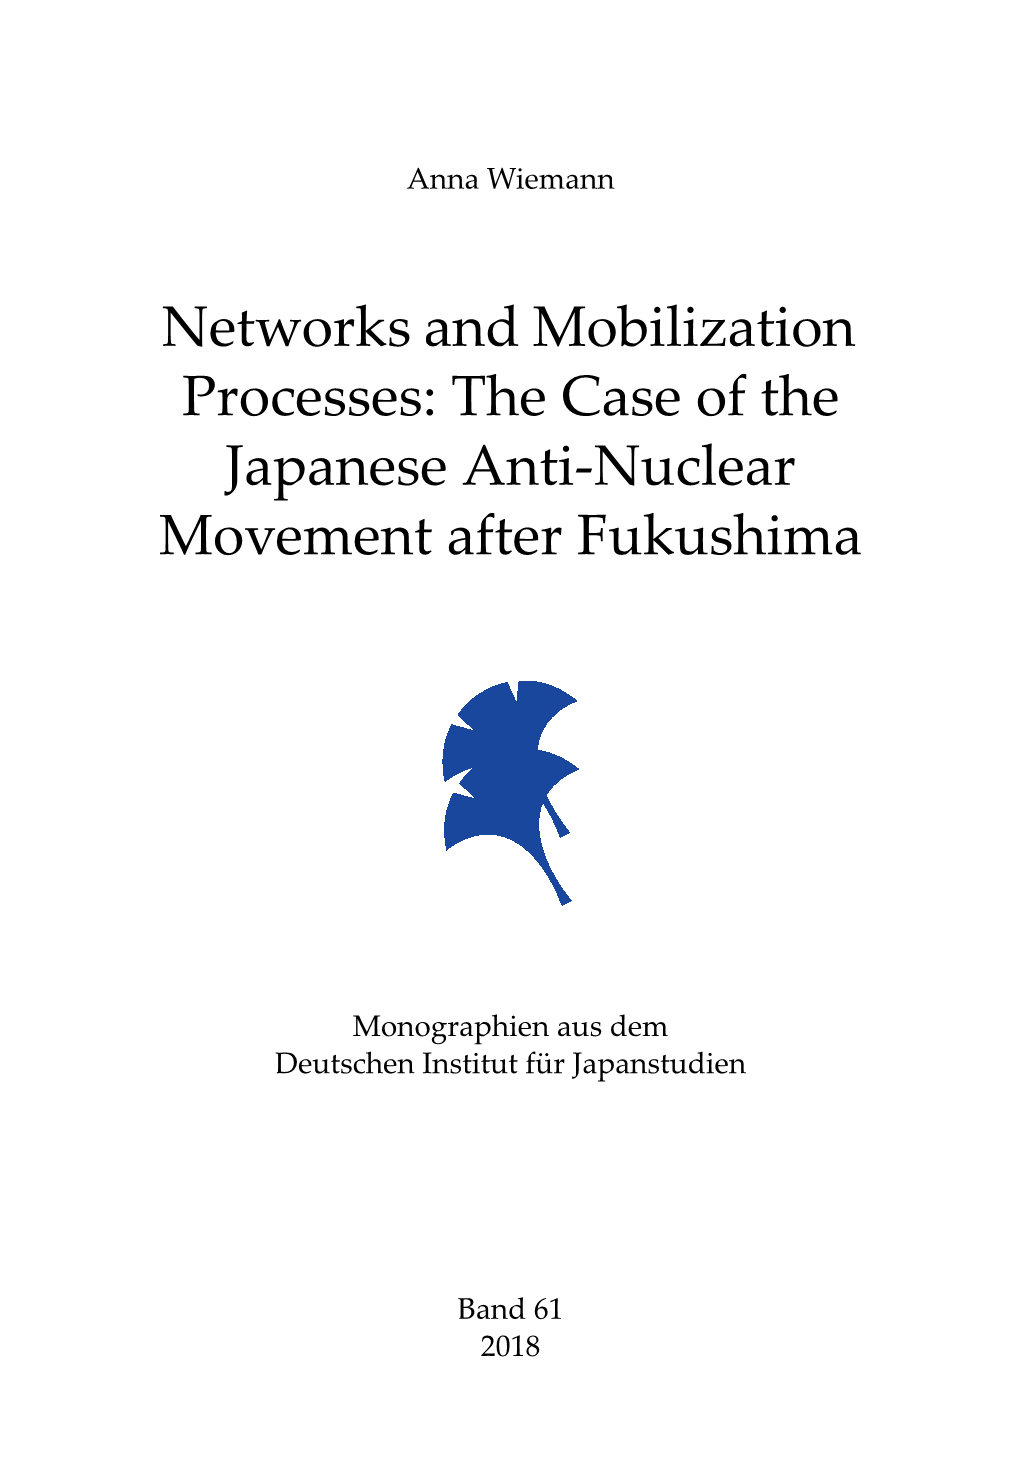 The Case of the Japanese Anti-Nuclear Movement After Fukushima